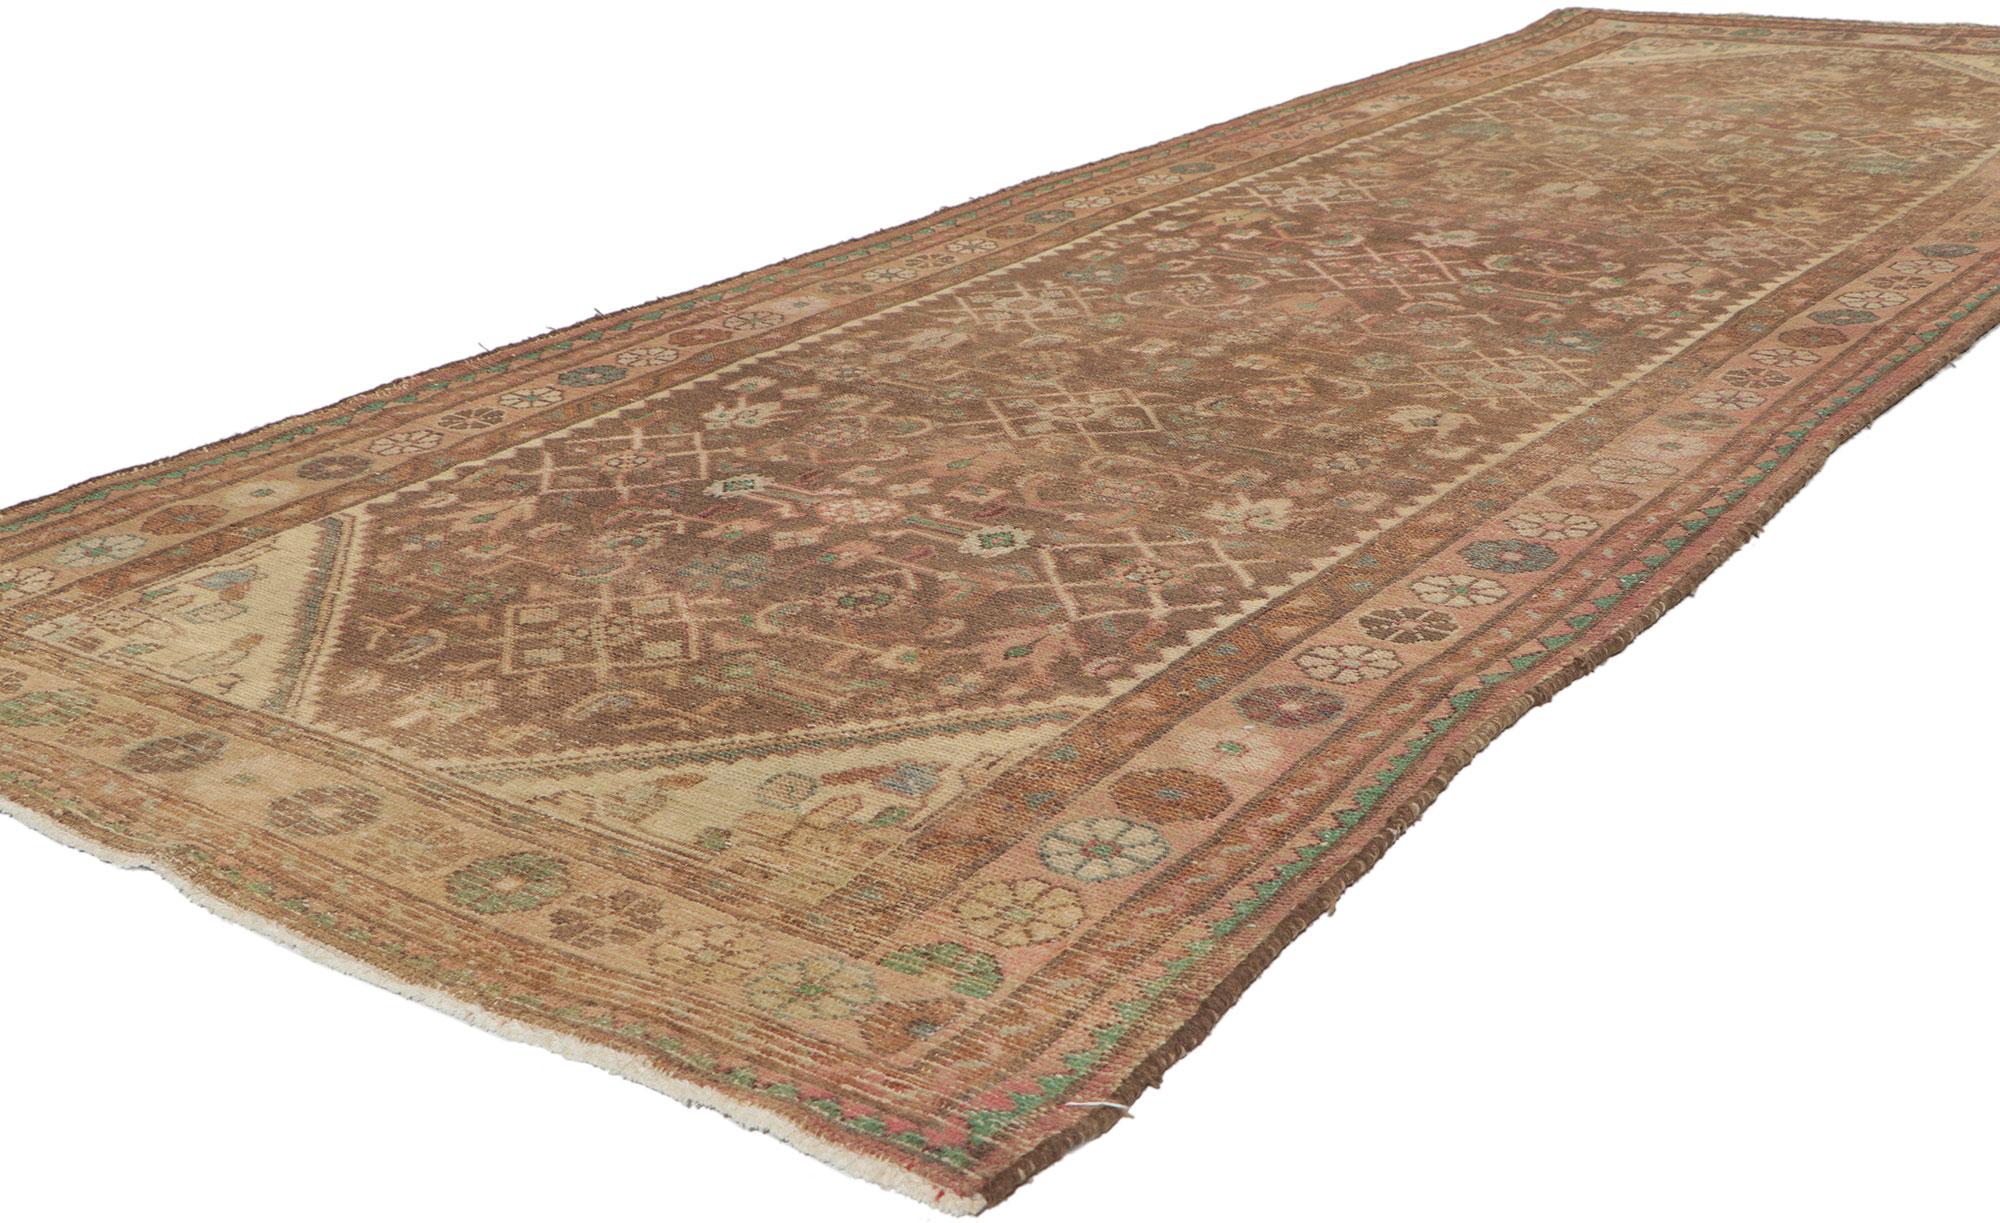 77673 Antique Persian Hamadan Runner, 03'08 x 10'03. With its effortless beauty, incredible detail and texture, this hand knotted wool antique Persian Hamadan runner is a captivating vision of woven beauty. The timeless design and earth-tone colors